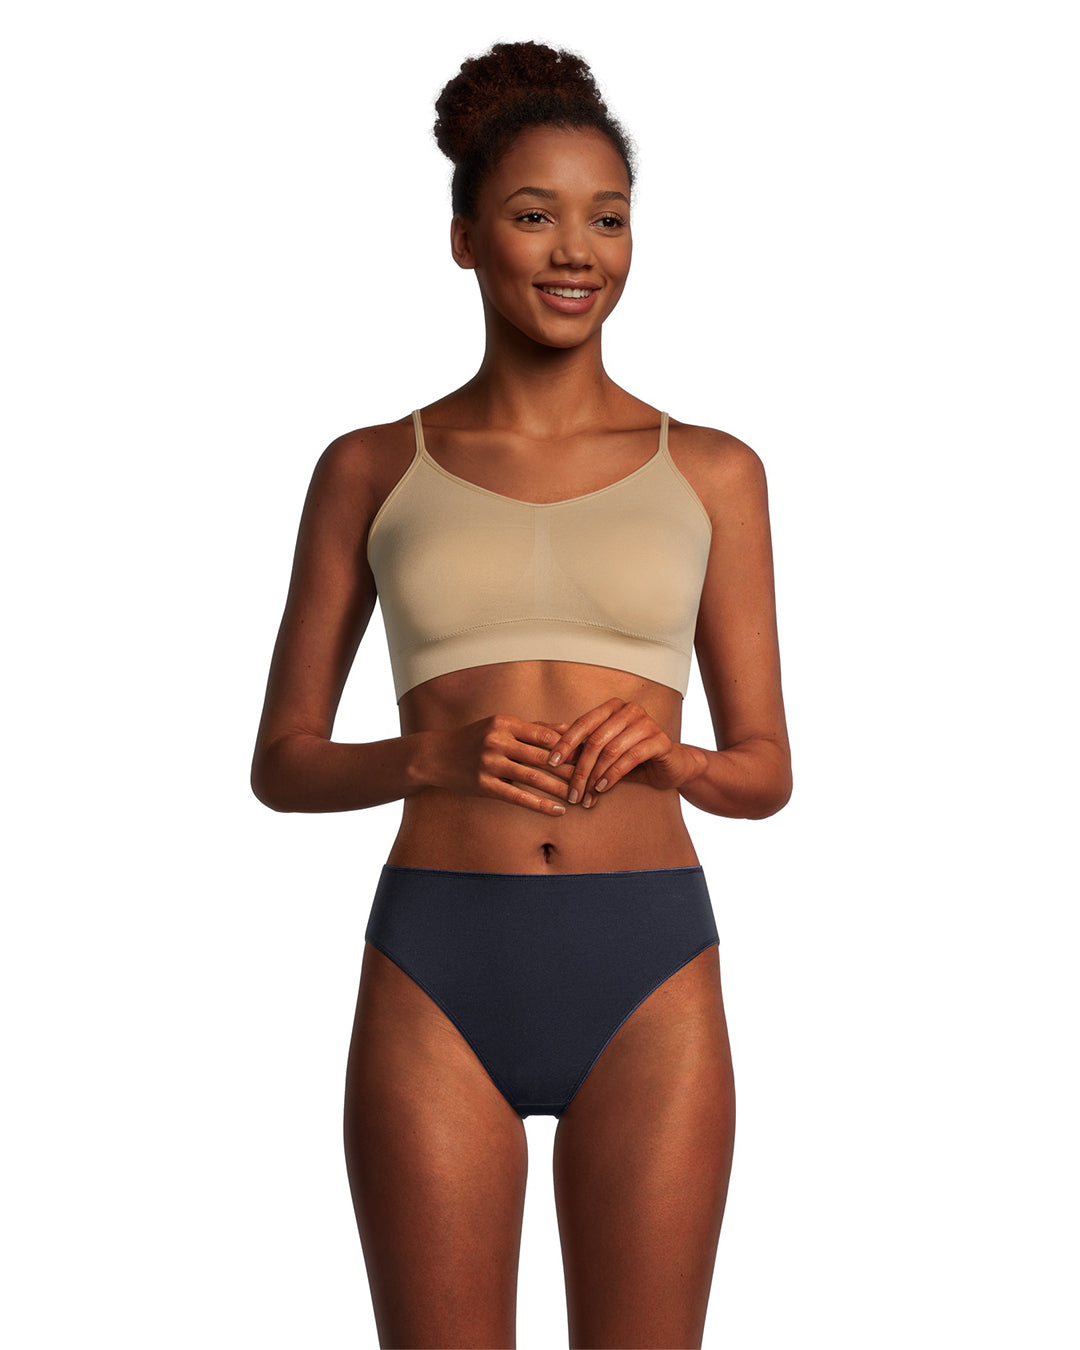 Golden Bra - 🔵 DERMAWEAR - Unique Women's Shapewear!🔵 🗨MINI ABDOMEN  SHAPER - Gives a Curvy Centre to your Body Frame🗨 📢📢📢 DM for Inquiries  📢📢📢 ✓Specially Designed , Blended Four Way